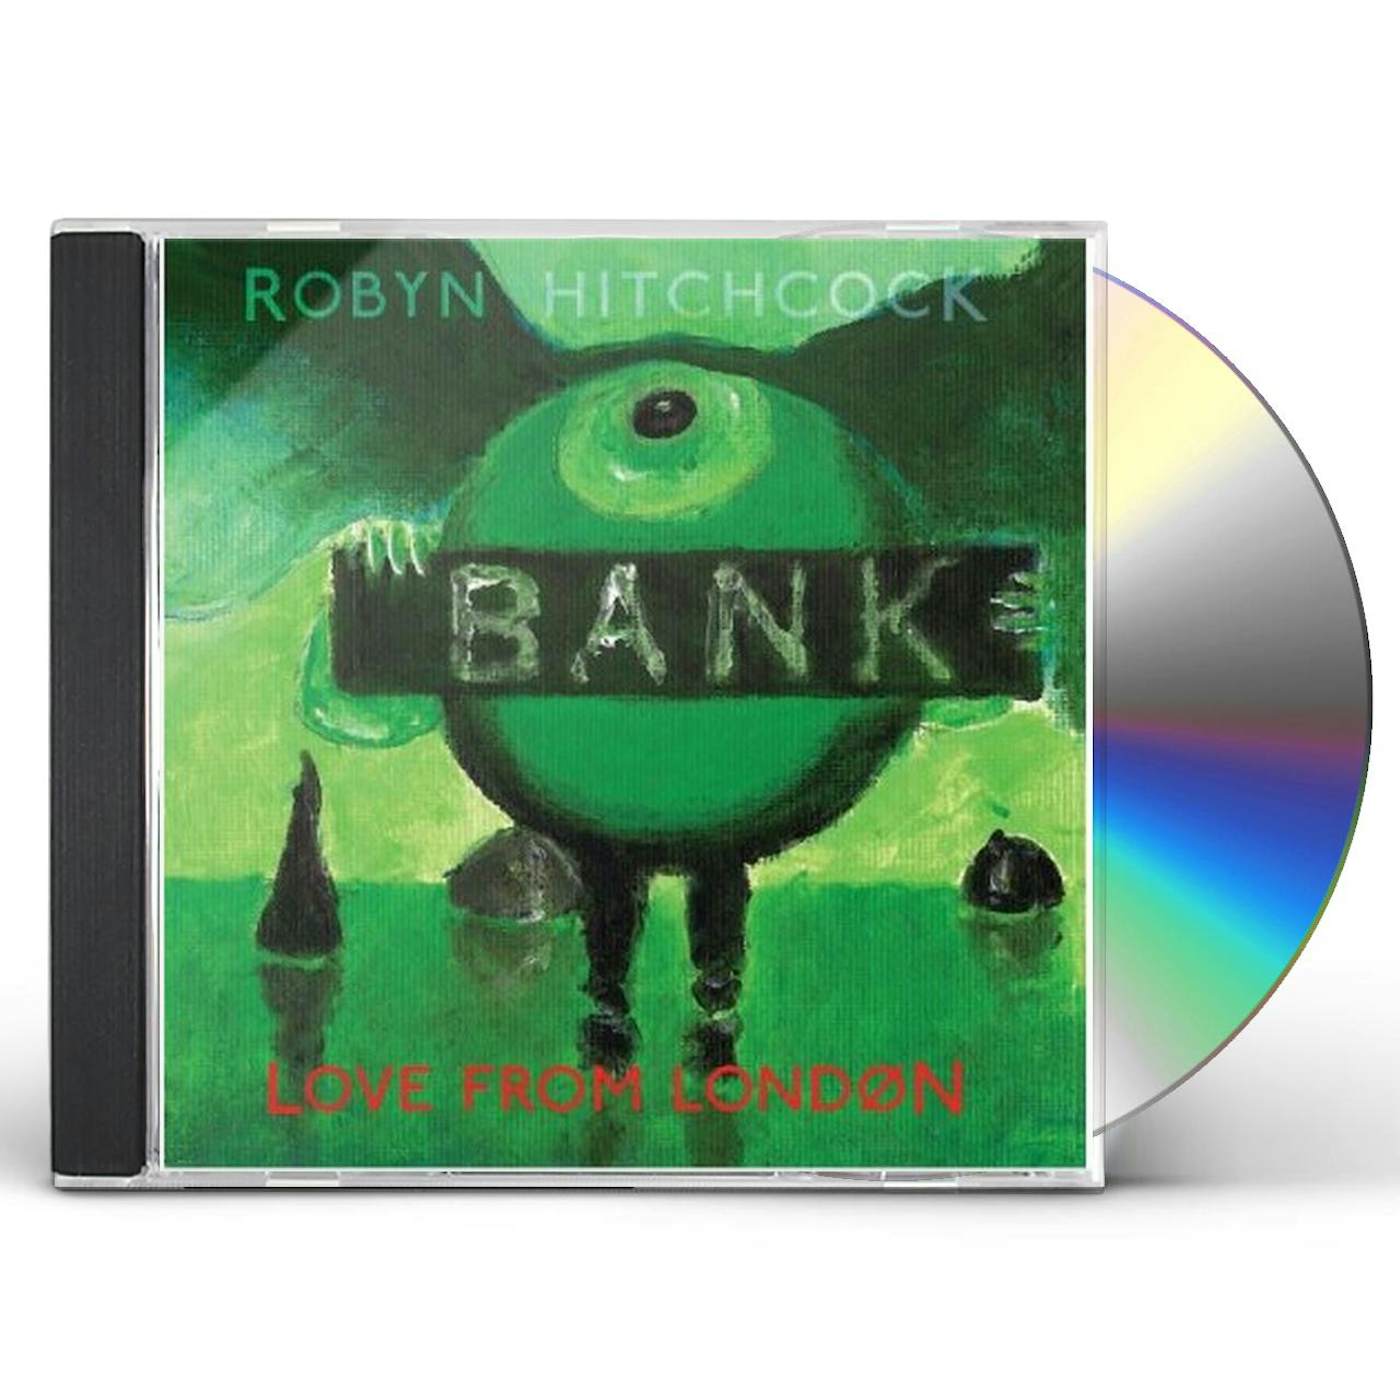 Robyn Hitchcock LOVE FROM LONDON CD